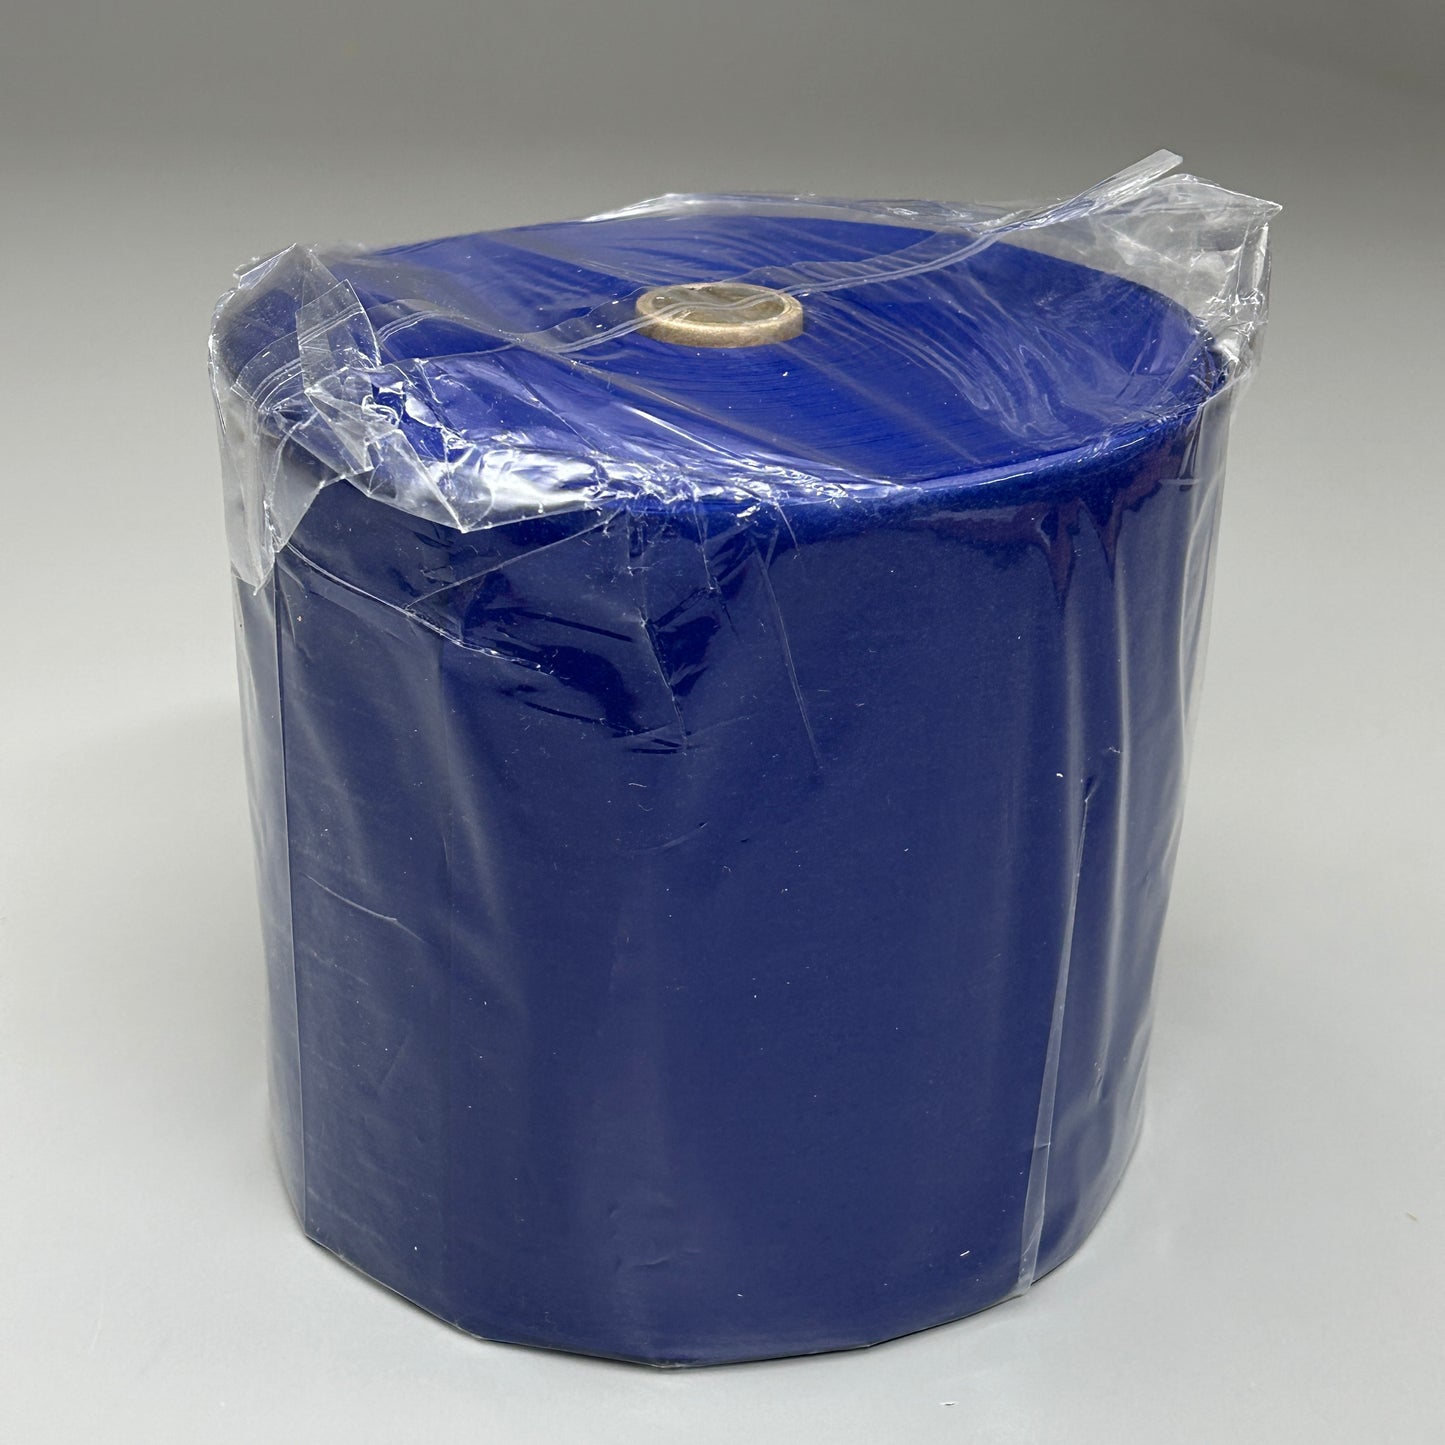 CANDO No Latex Exercise Band Heavy 50 yd Blue (New)